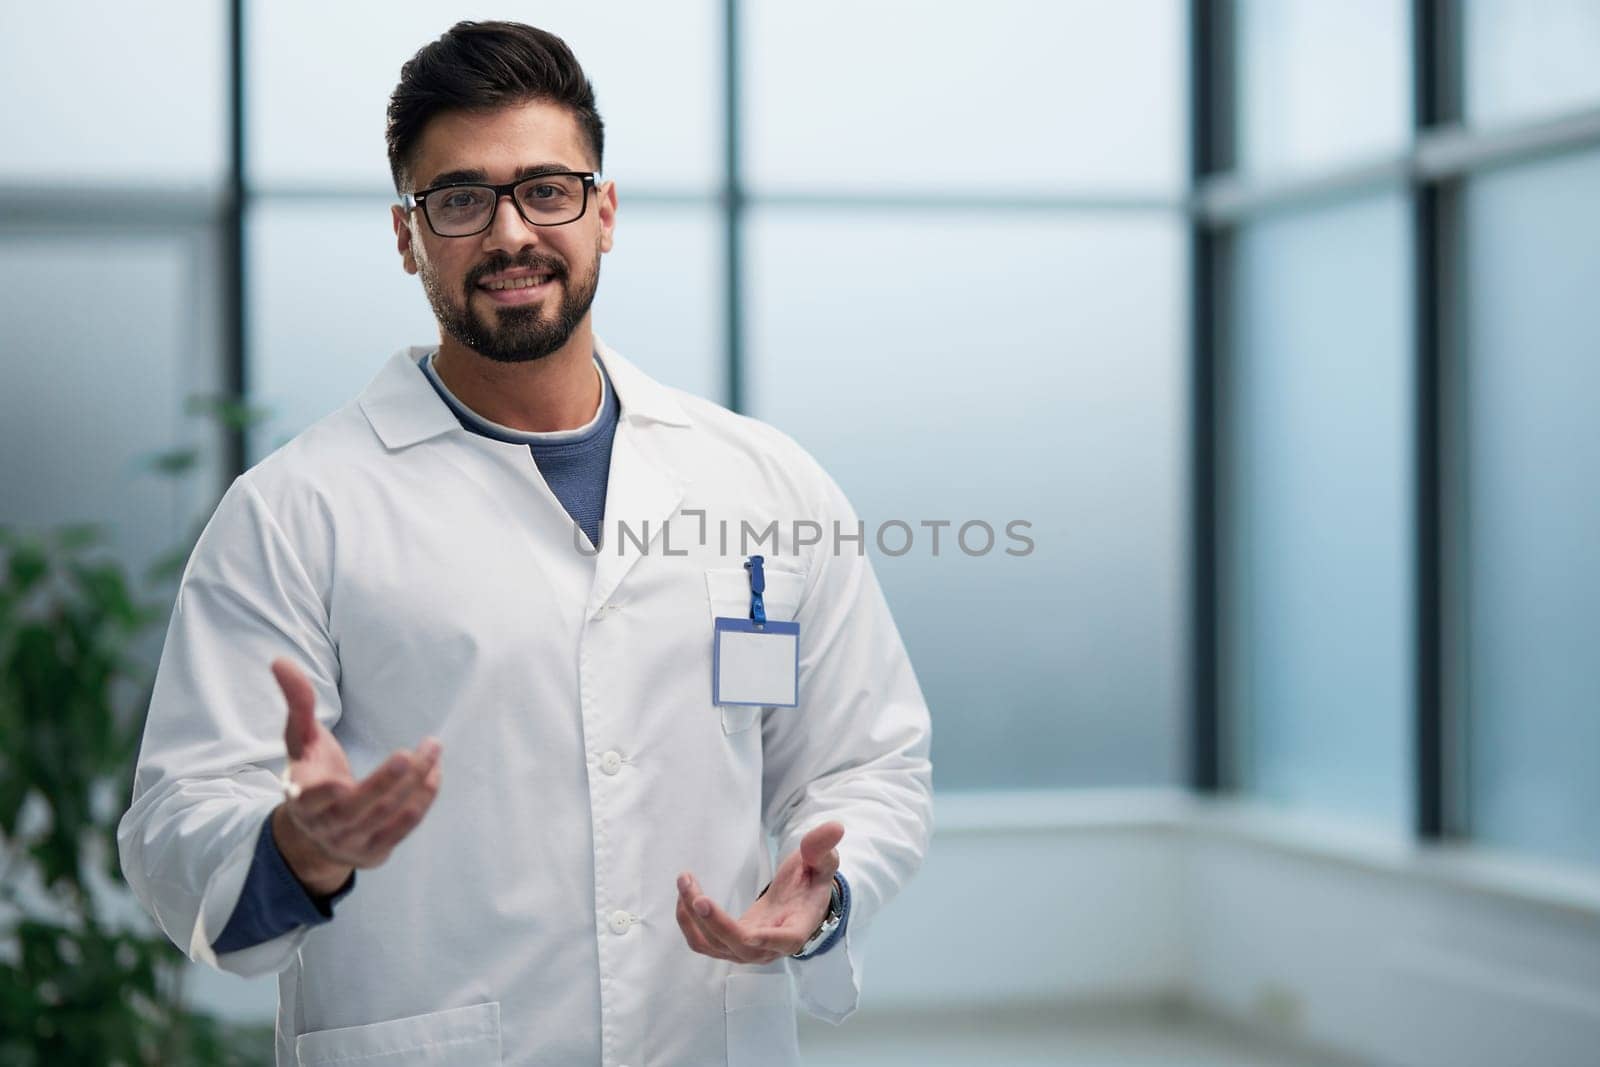 The doctor, an average man, makes a hand gesture inviting patients. by Prosto